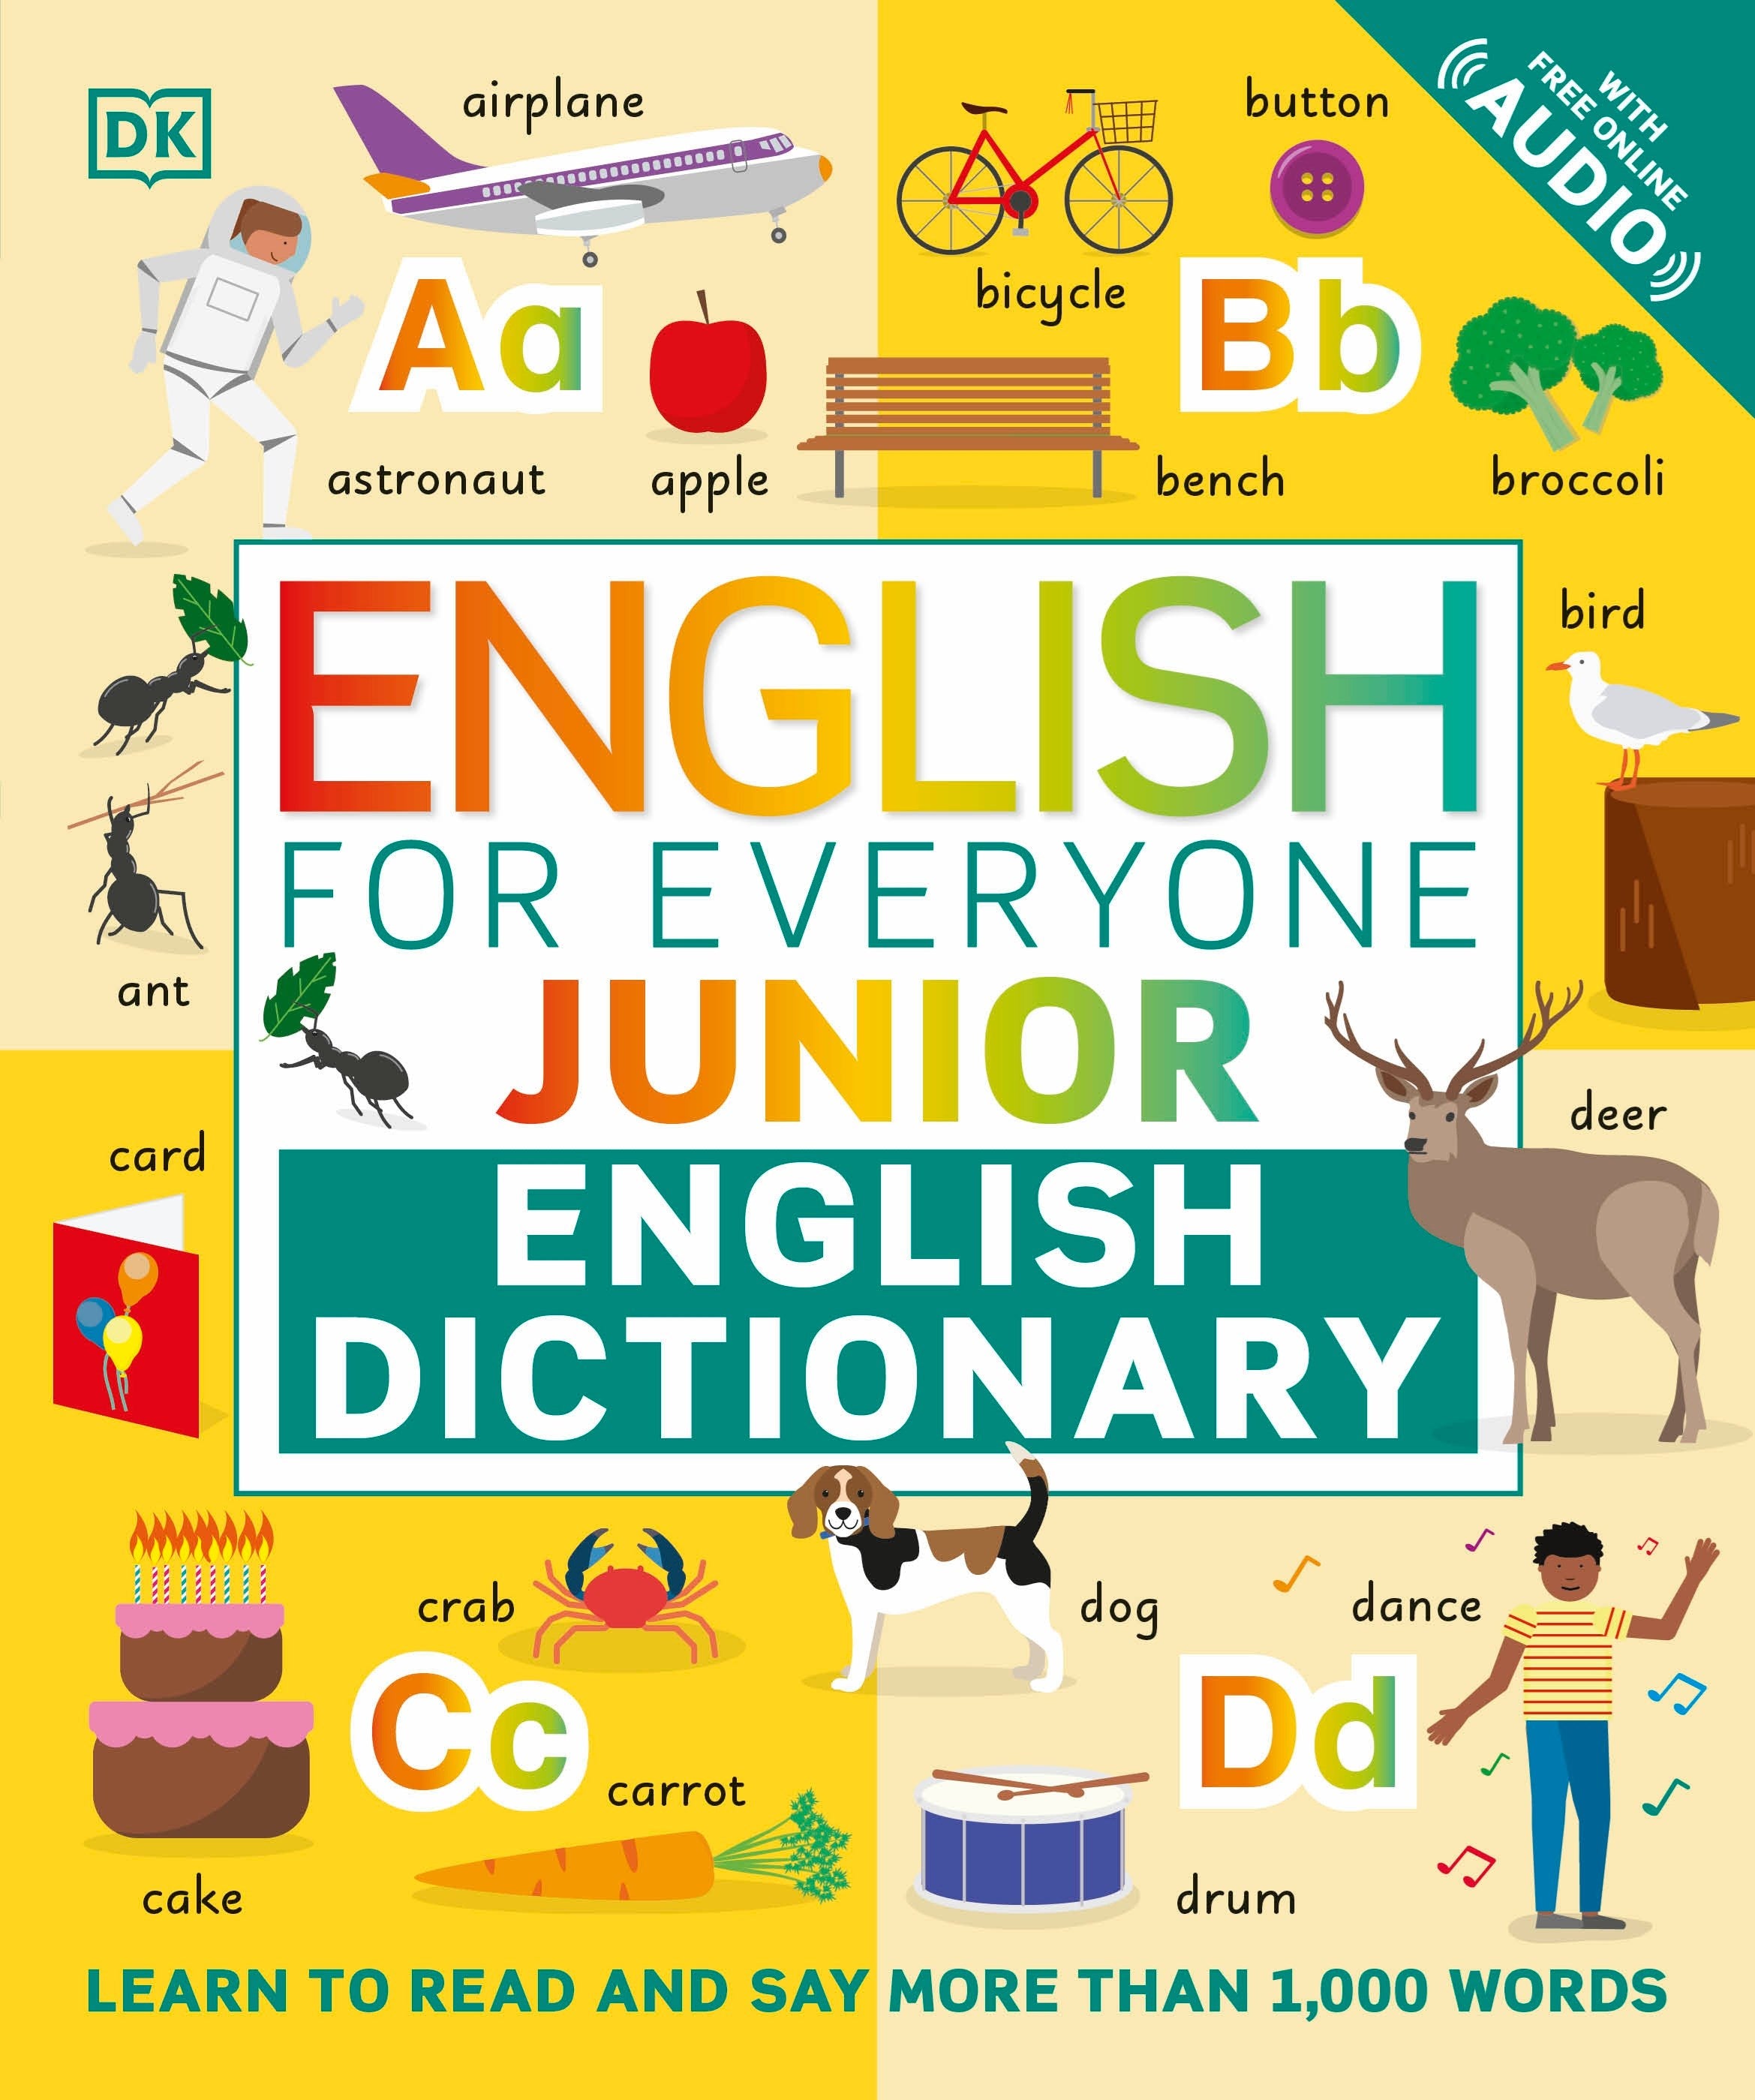 English for Everyone Junior English Dictionary: Learn to Read and Say 1,000 Words